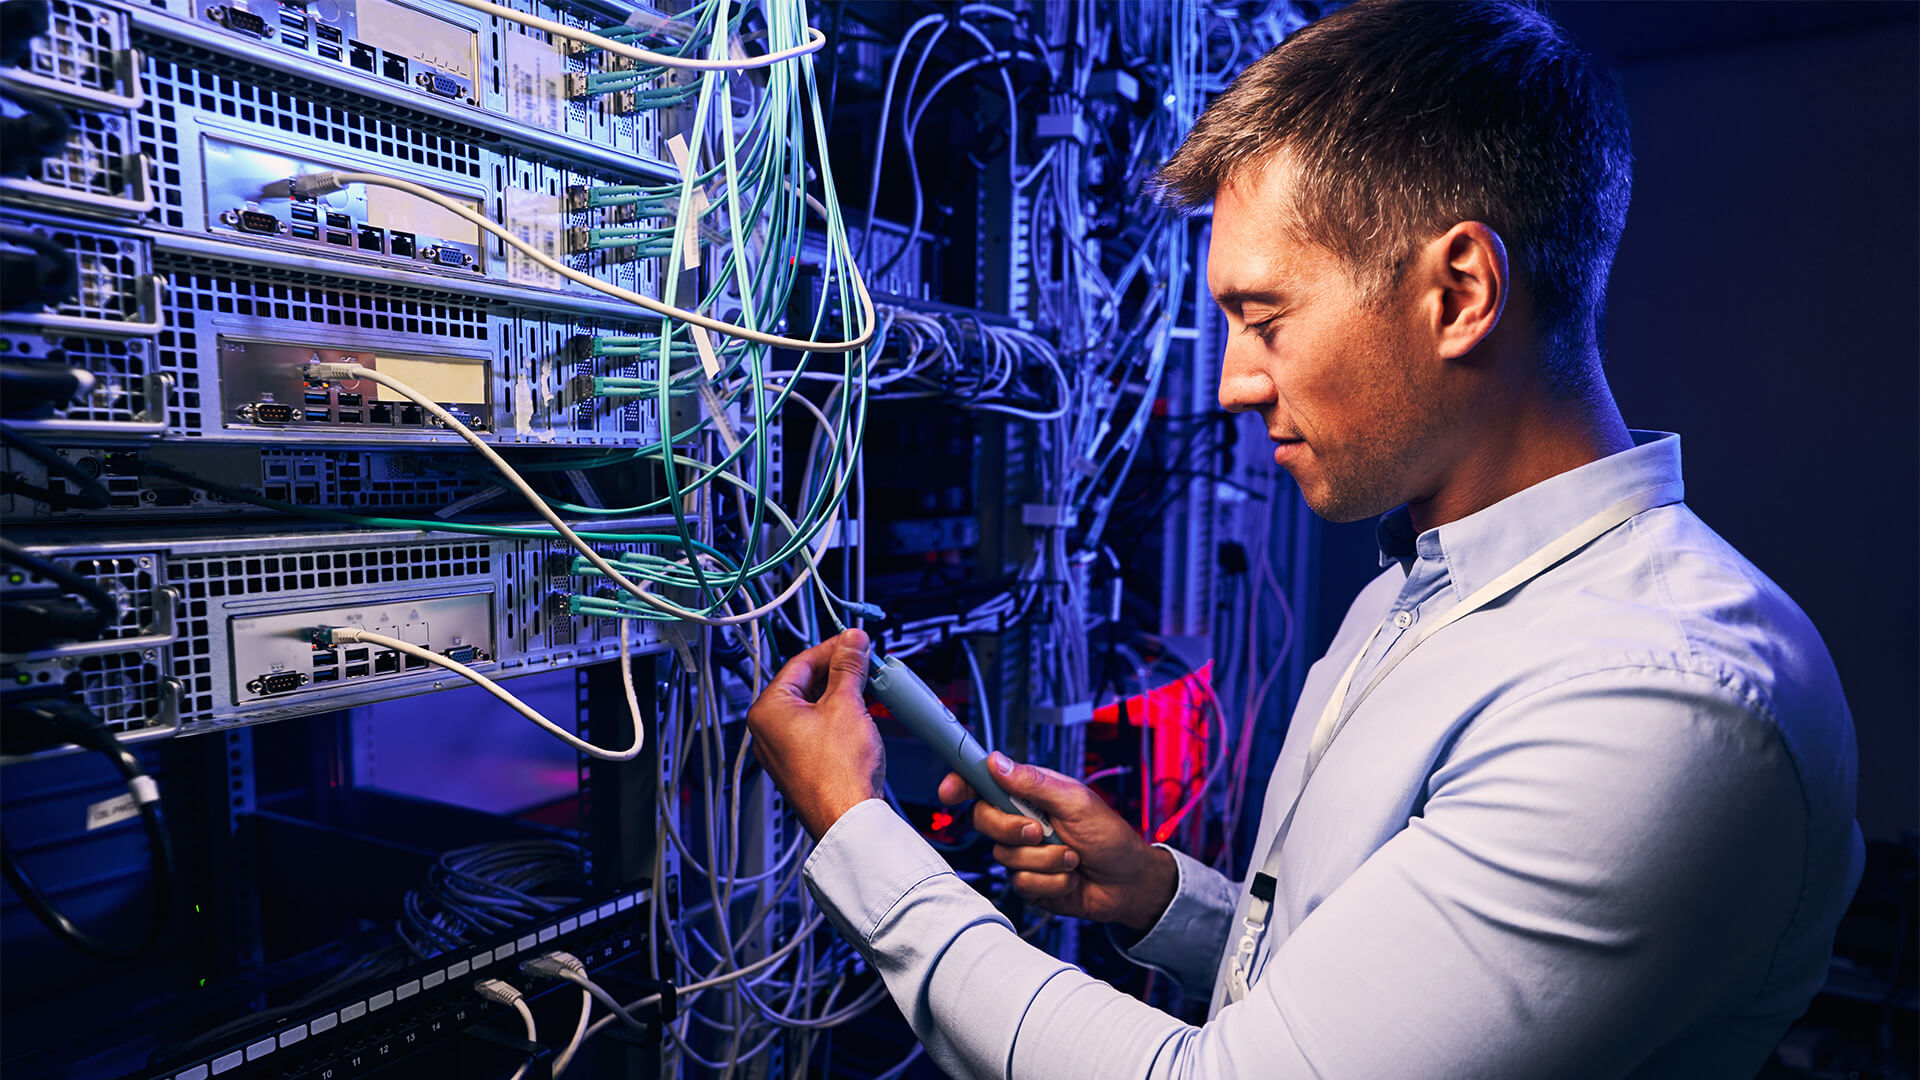 Focused data center employee checking cabling infrastructure